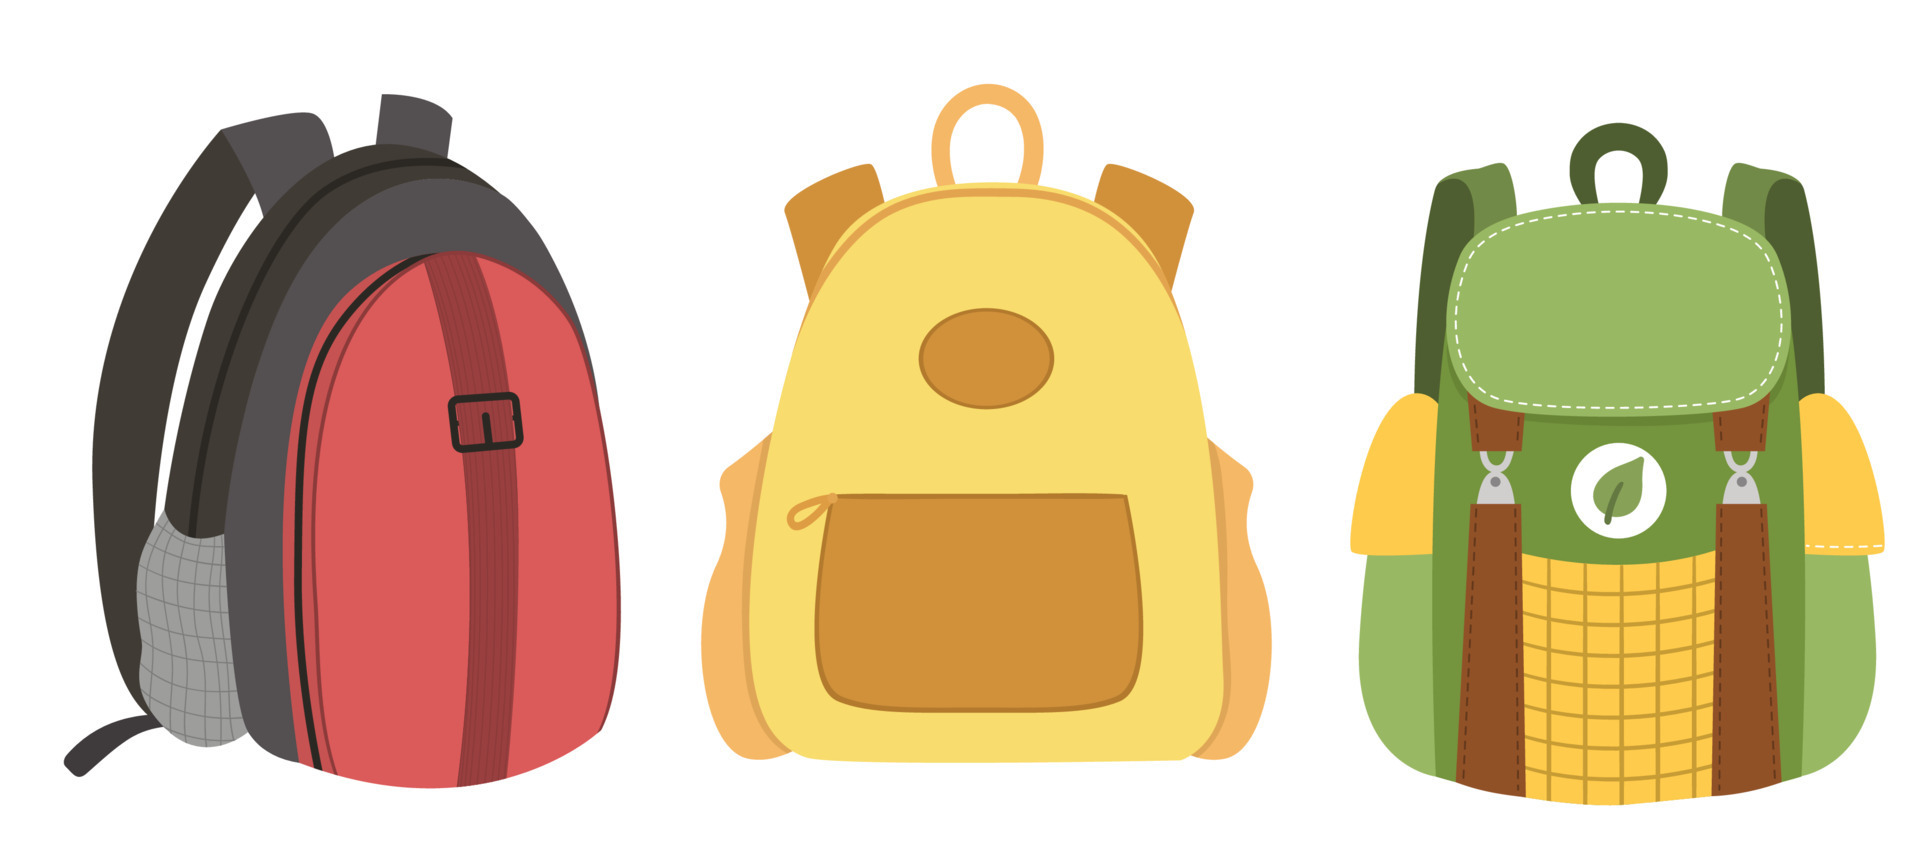 Backpack Clipart, Transparent PNG Clipart Images Free Download - ClipartMax